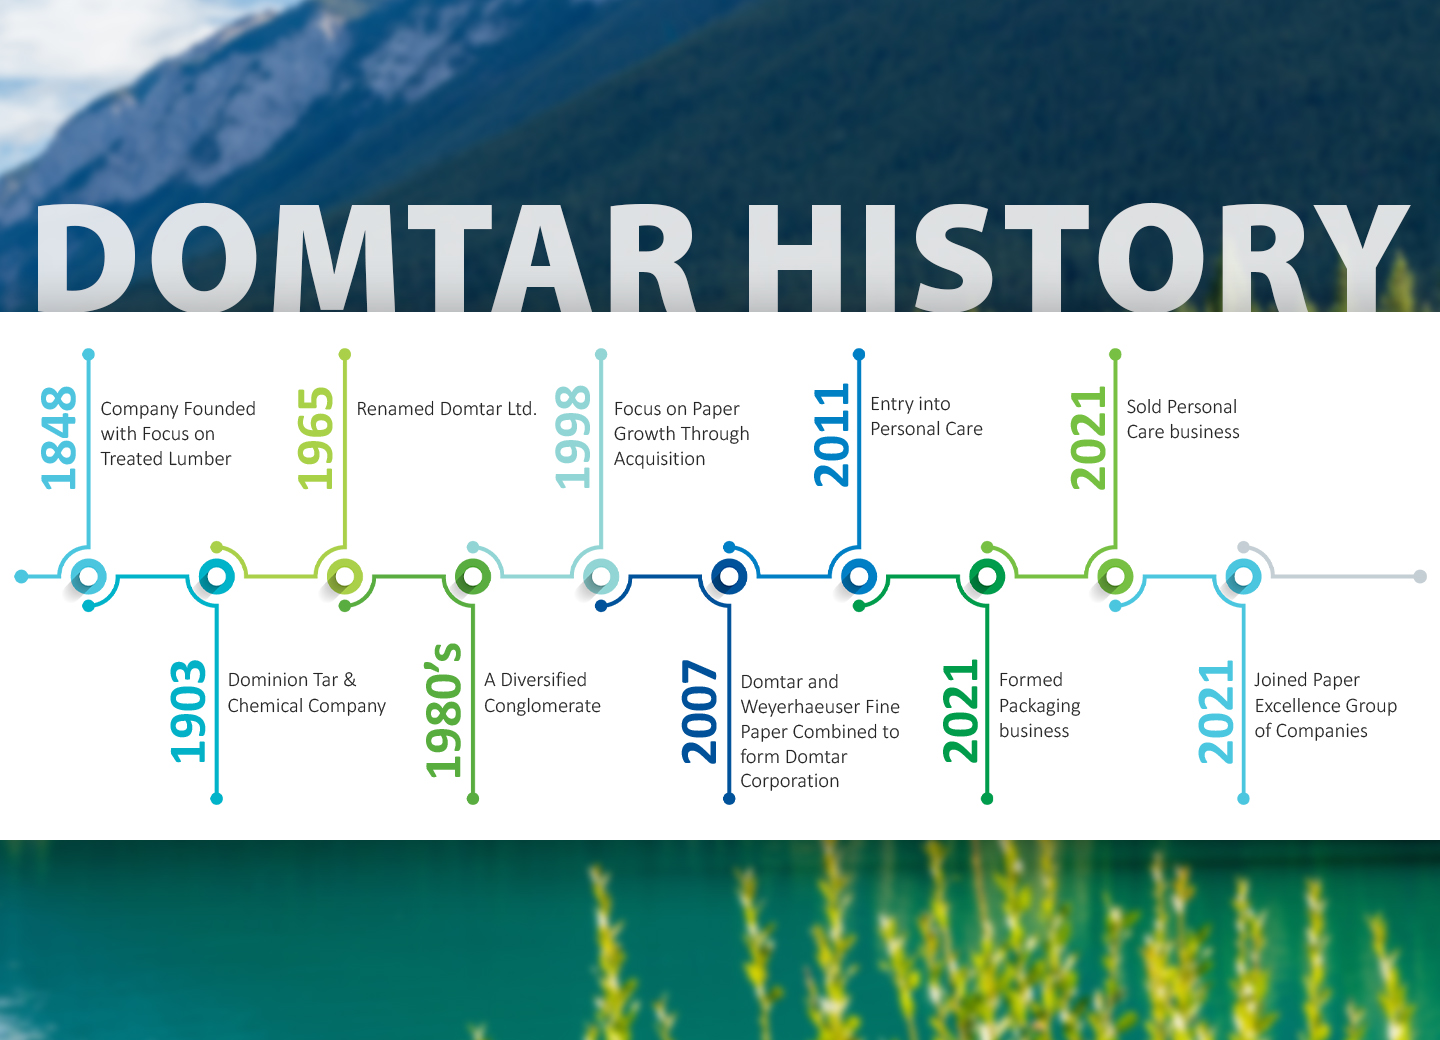 The next chapter in Domtar History